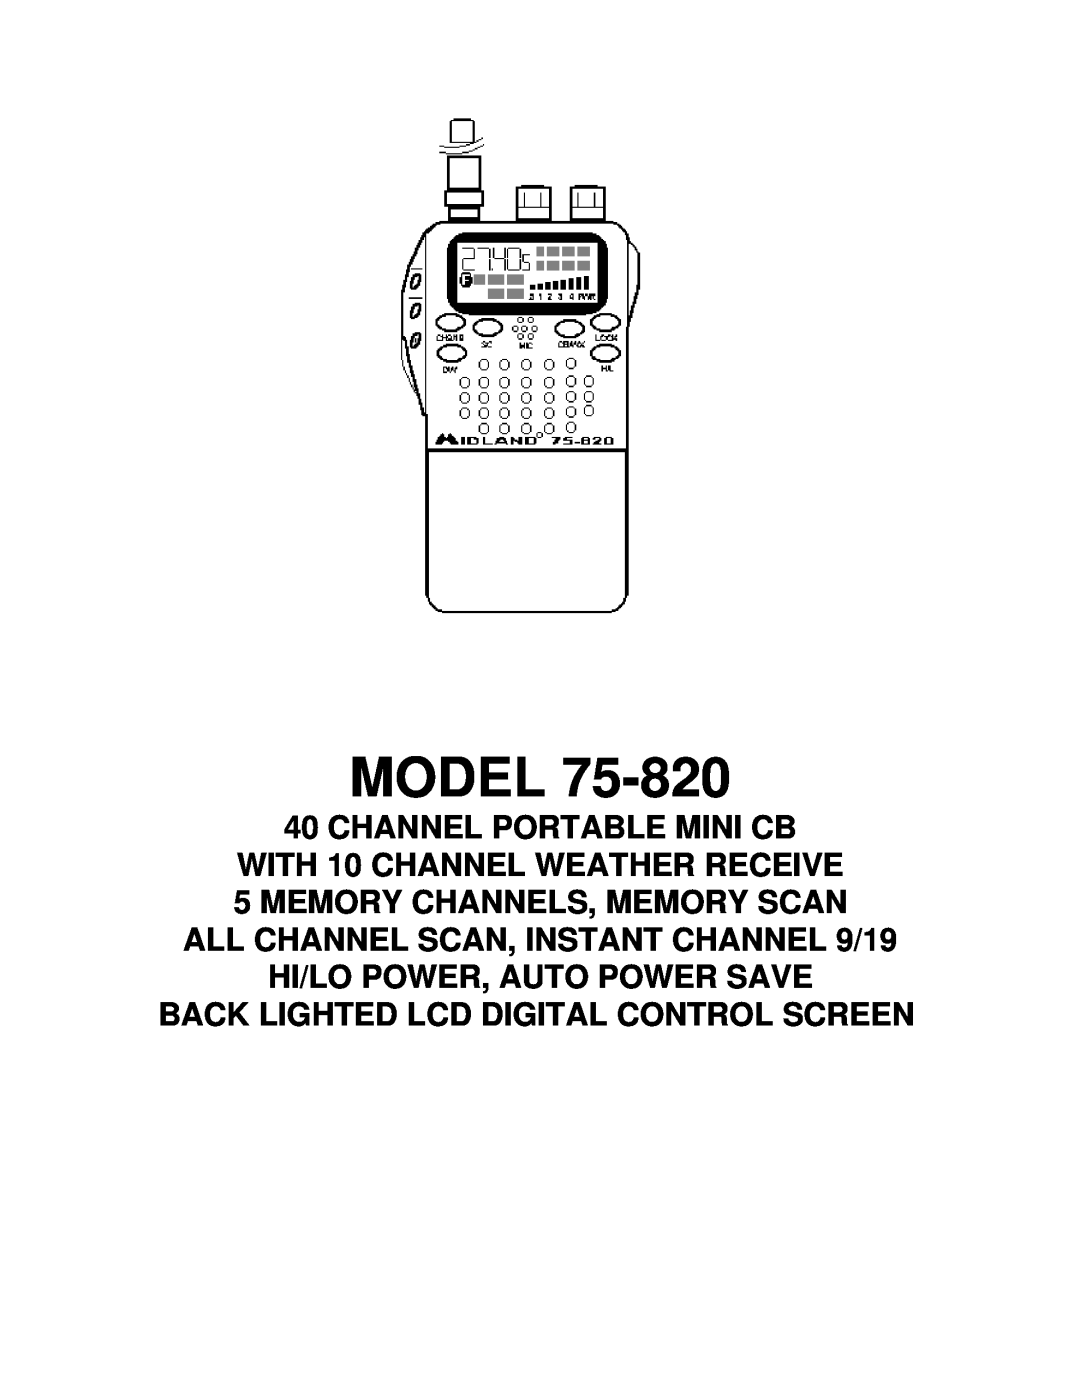 Midland Radio 75.82 manual Model, Channel Portable Mini Cb, WITH 10 CHANNEL WEATHER RECEIVE, Memory Channels, Memory Scan 